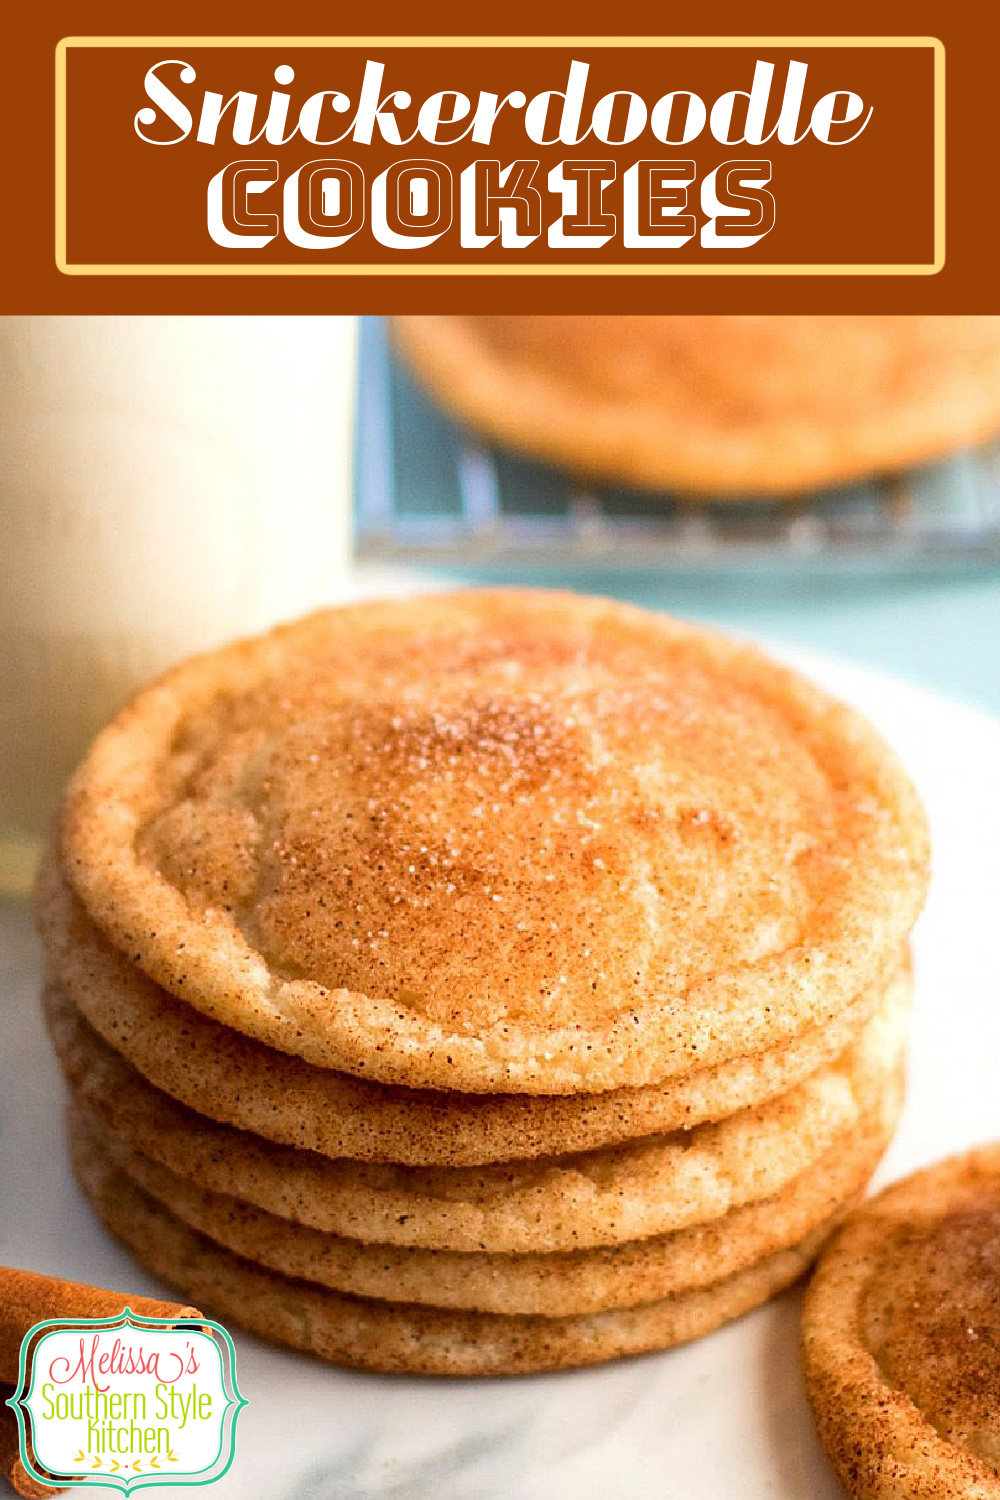 These sweet and spicy classic cookies won't last long in your cookie jar #snickerdoodles #snickerdoodlecookies #cookies #holidaybaking #christmascookies #cinnamon #spicecookies #desserts #dessertfoodrecipes #southernfood #southernrecipes